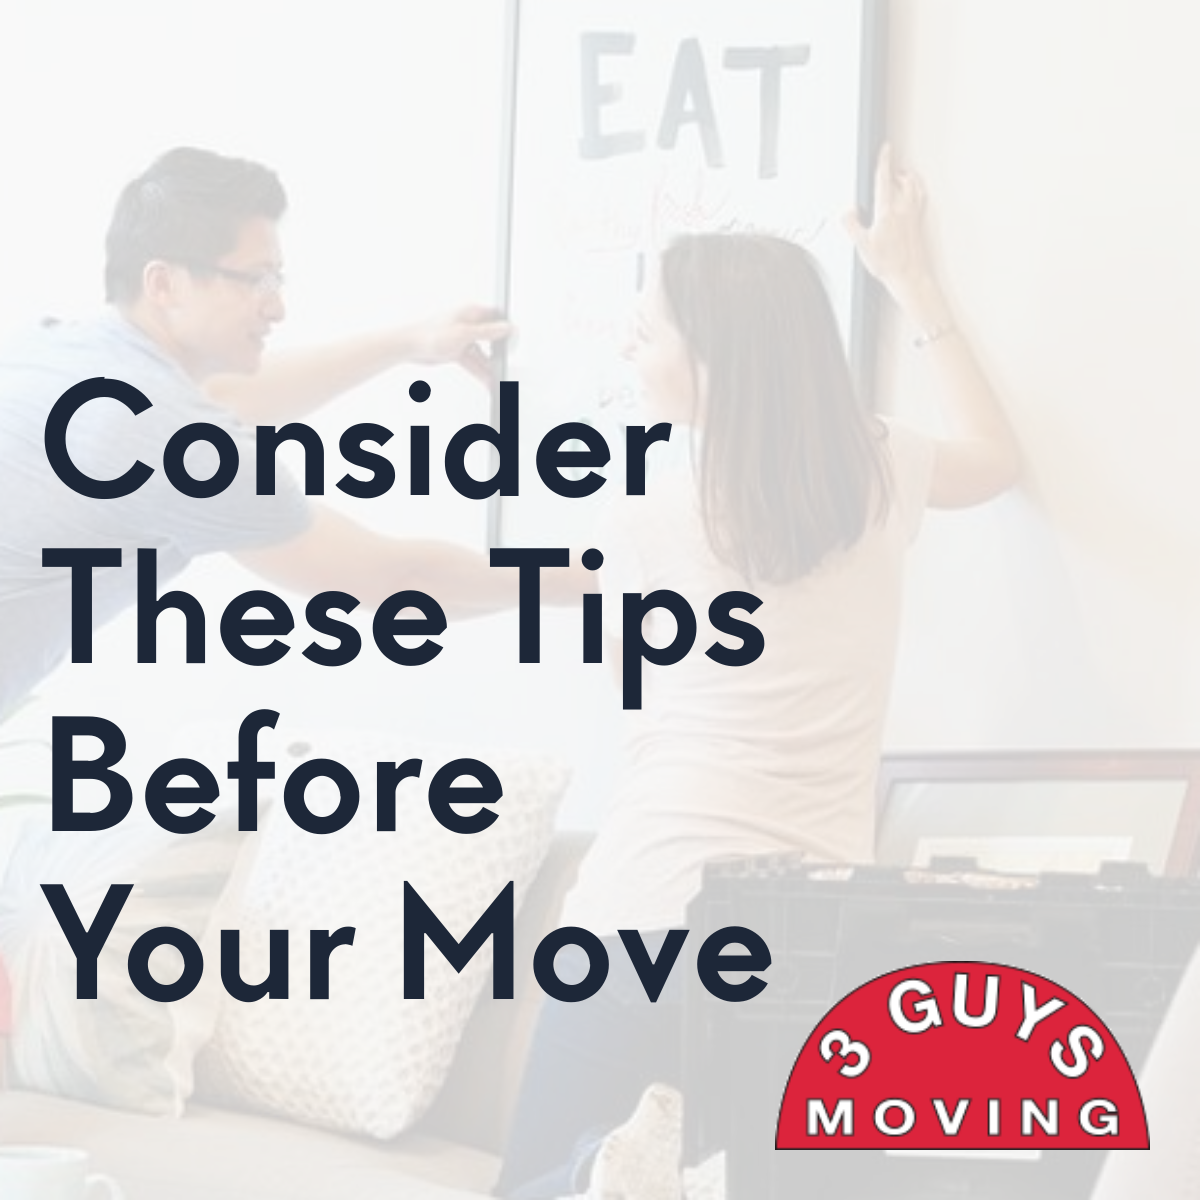 Consider These Tips Before Your Move - Consider These Tips Before Your Move